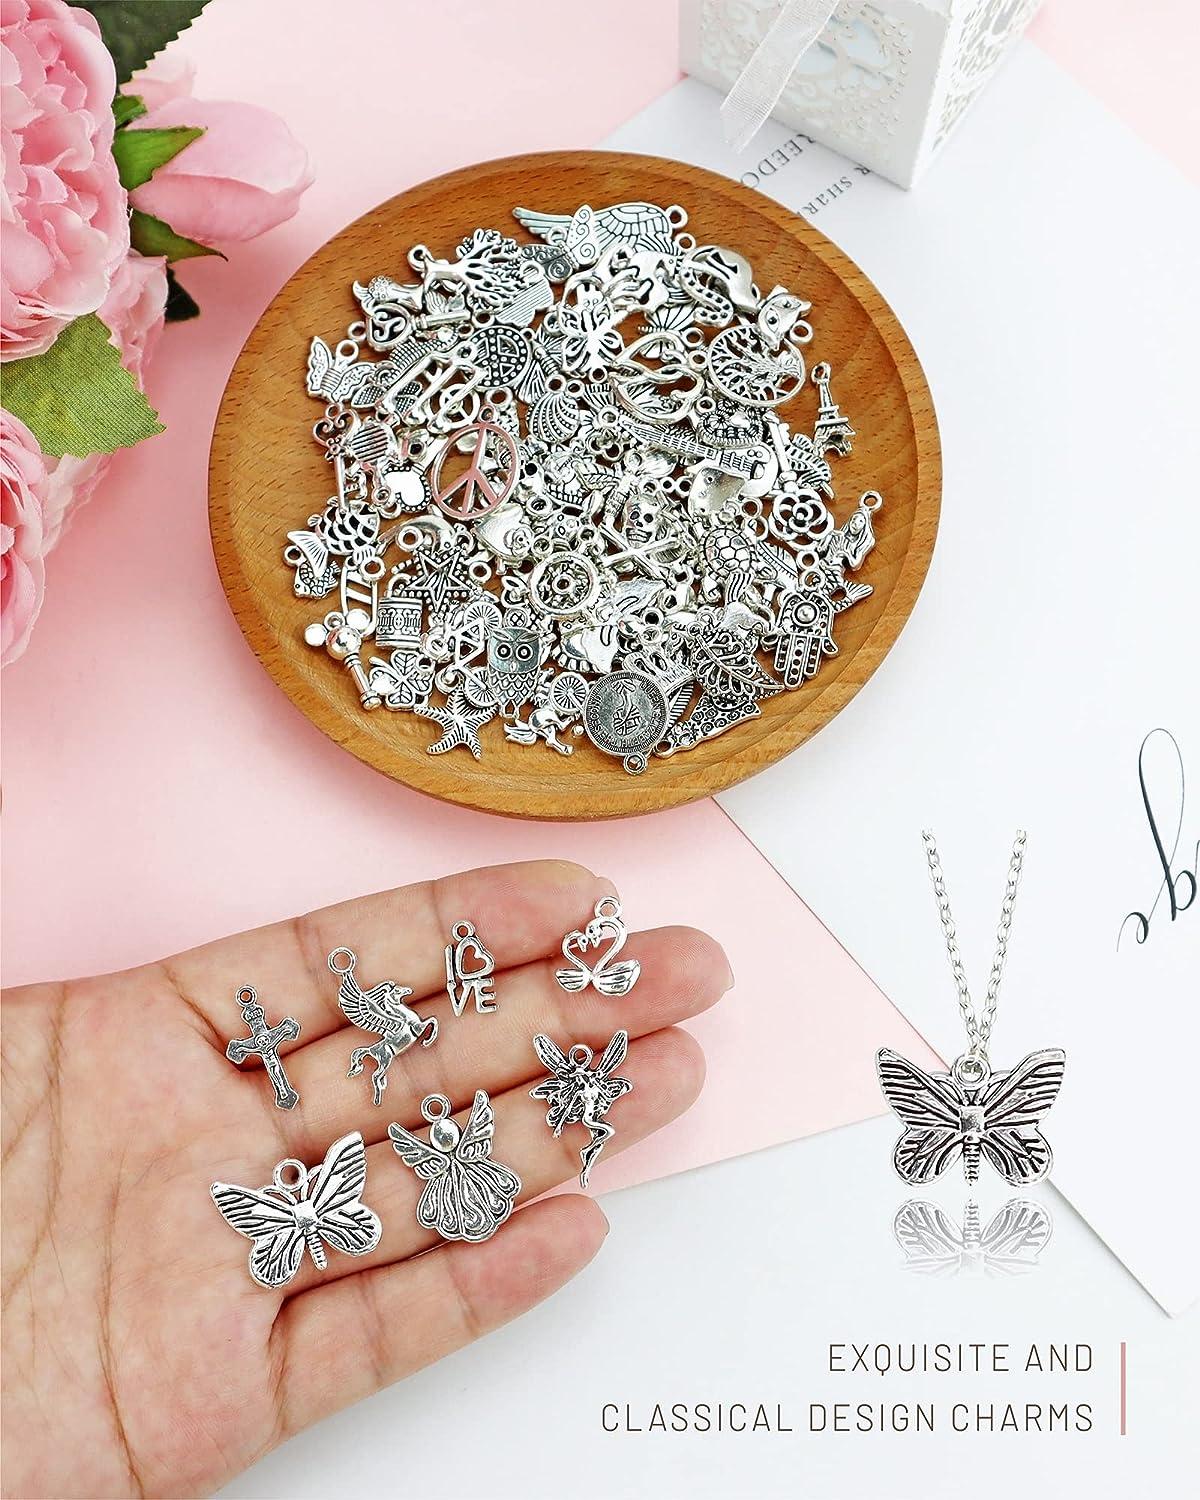 Wholesale Bulk Lots Jewelry Making Mixed Smooth Tibetan Silver Metal Charms  Pendants Diy For Necklace Bracelet 100 Pcs 7-25mm - Charms - AliExpress